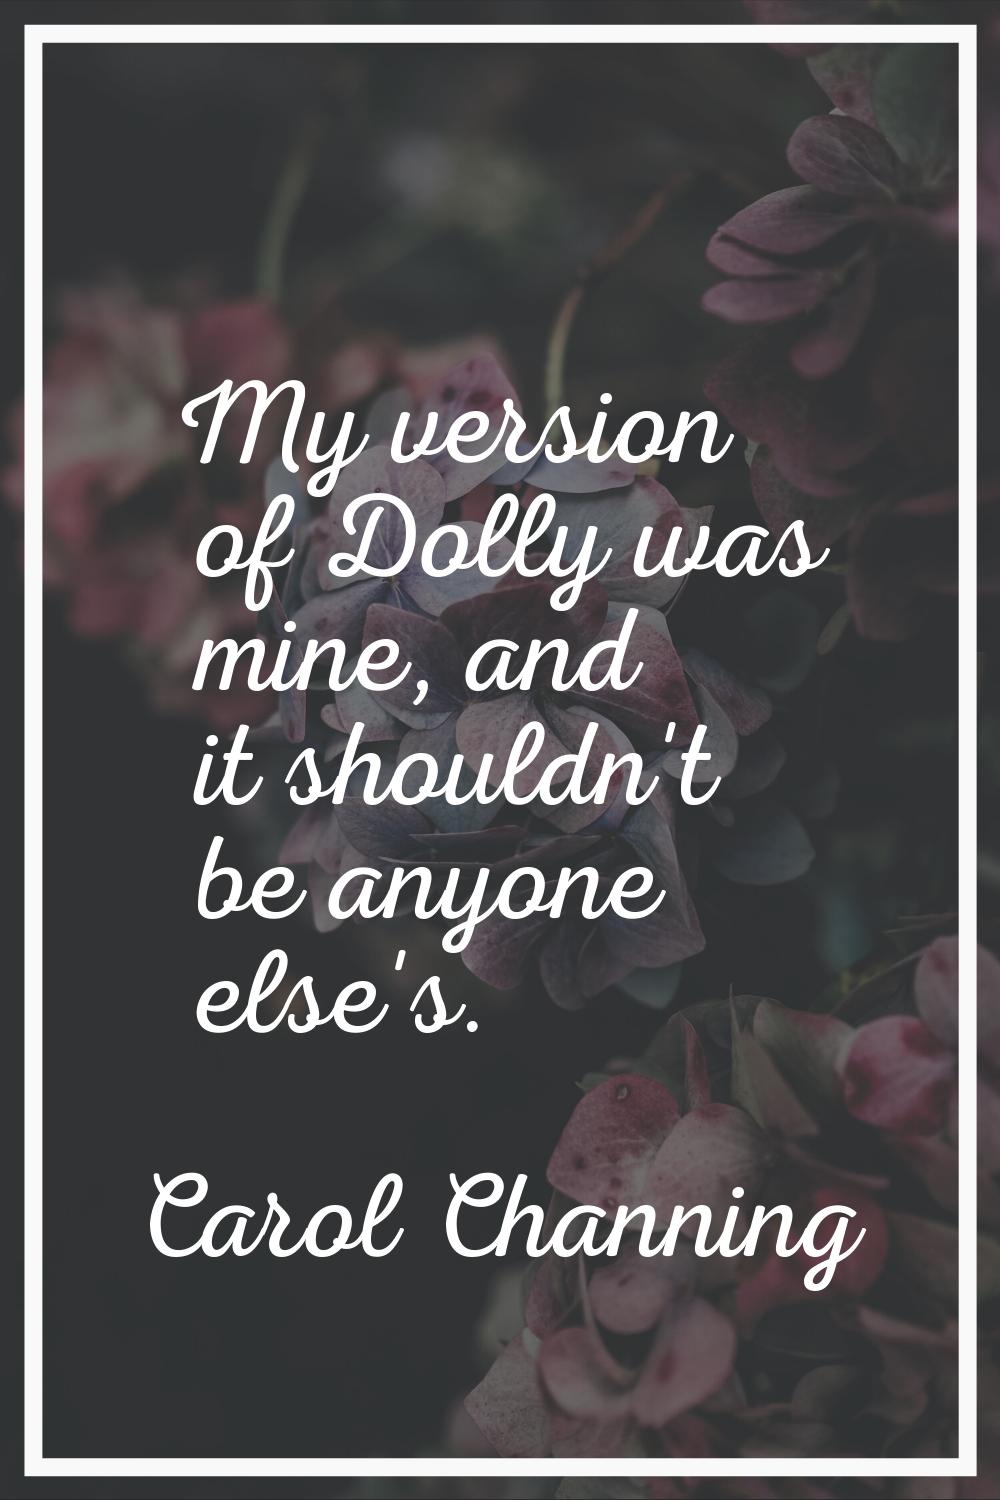 My version of Dolly was mine, and it shouldn't be anyone else's.